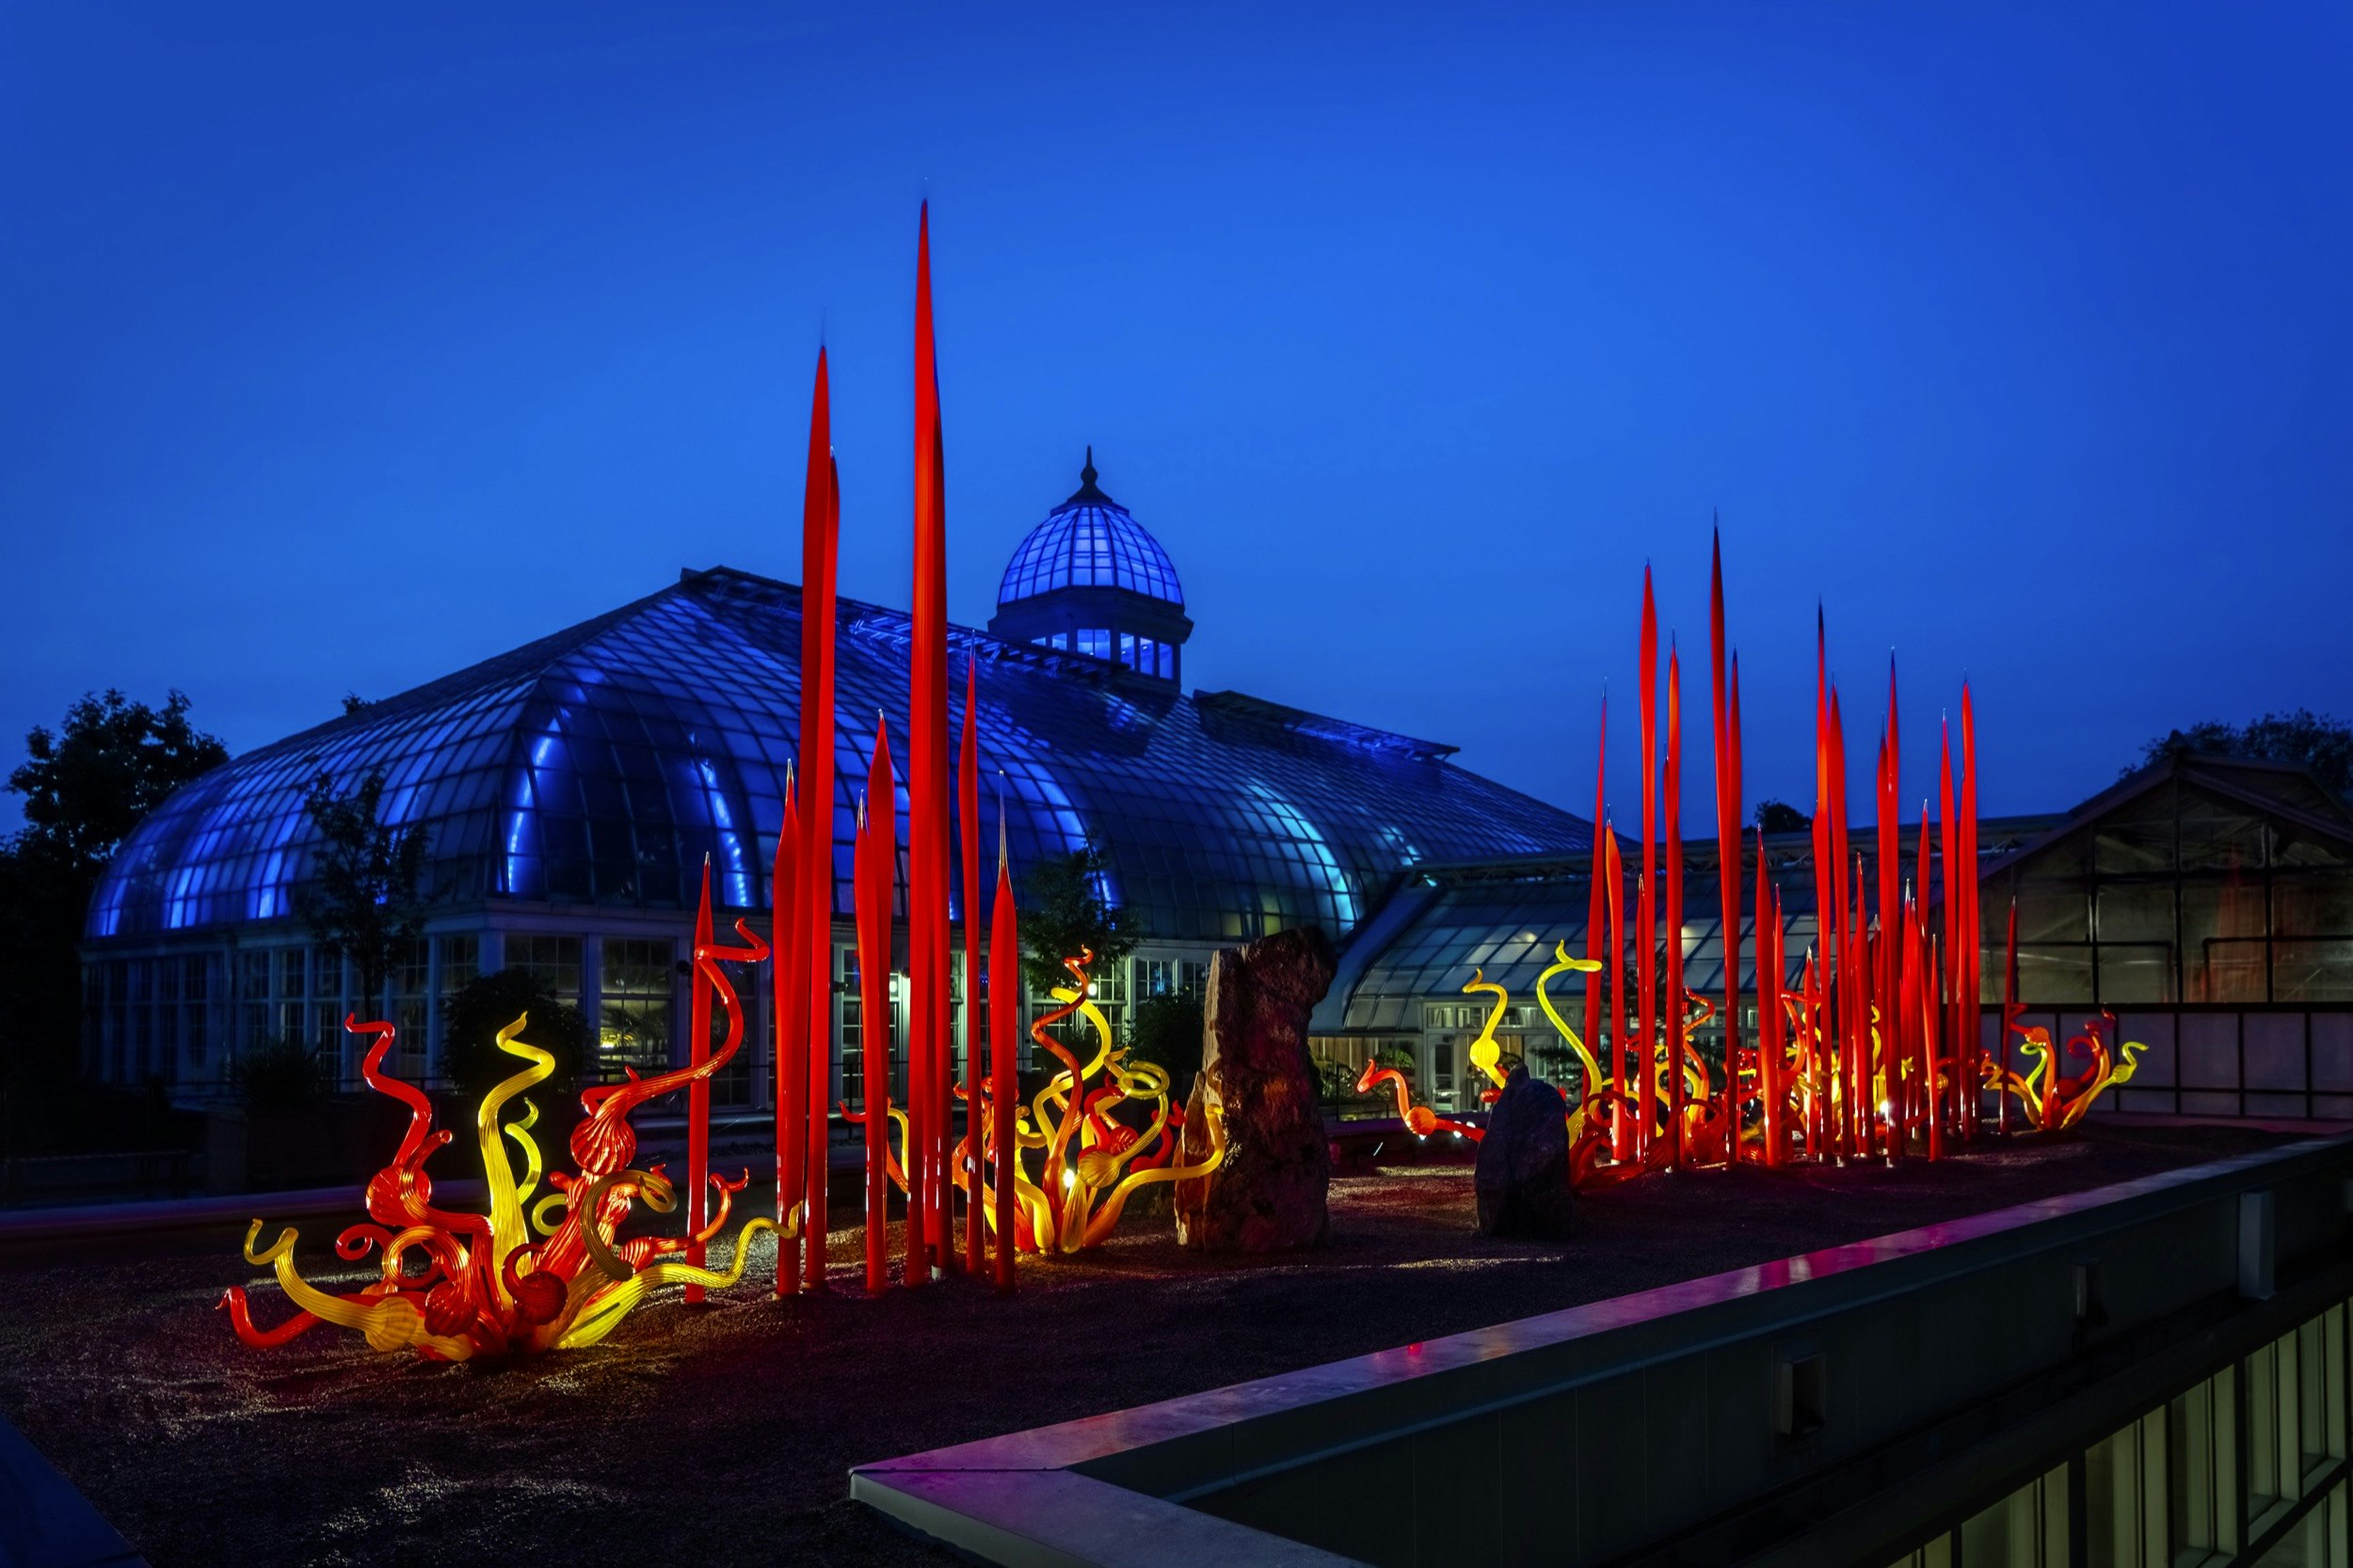 Spiky red tendrils of illuminated glass, surrounded by shorter curled ones of other warm colors, stand out at twilight in the garden of a museum; Where to see Chihuly in the USA